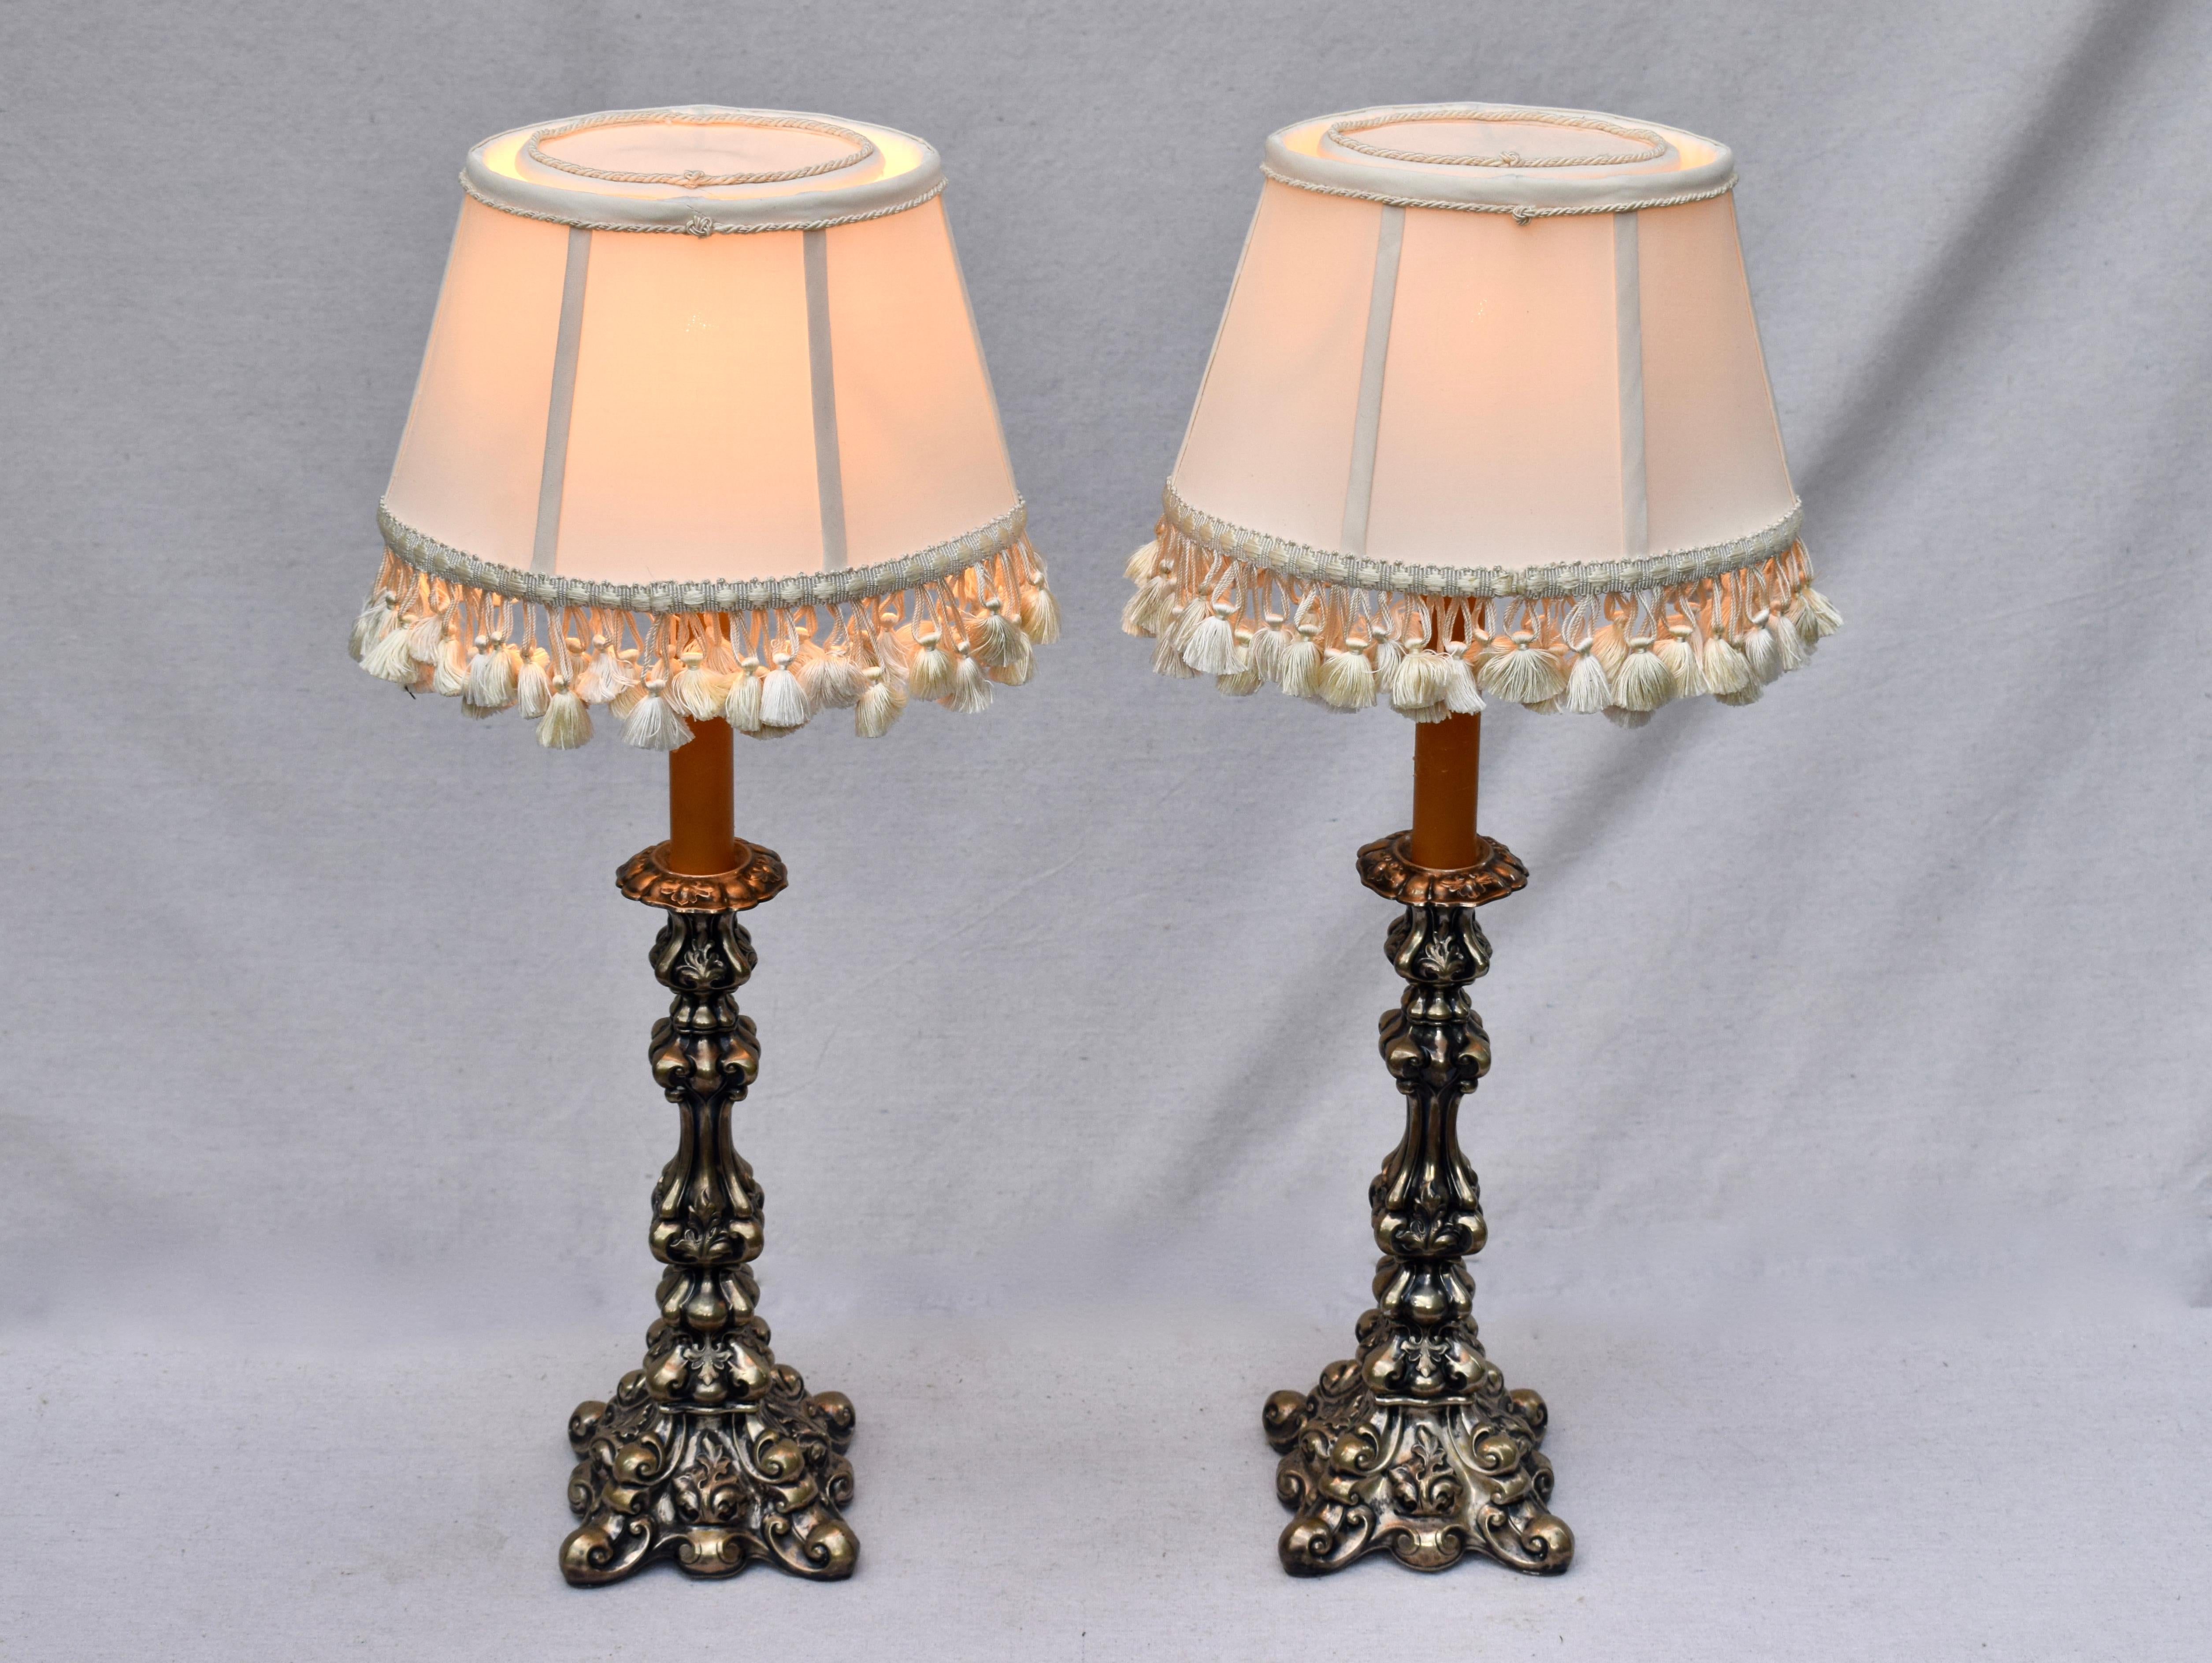 20th Century Italian Rococo Style Pair of Silver Candlestick Table Lamps For Sale